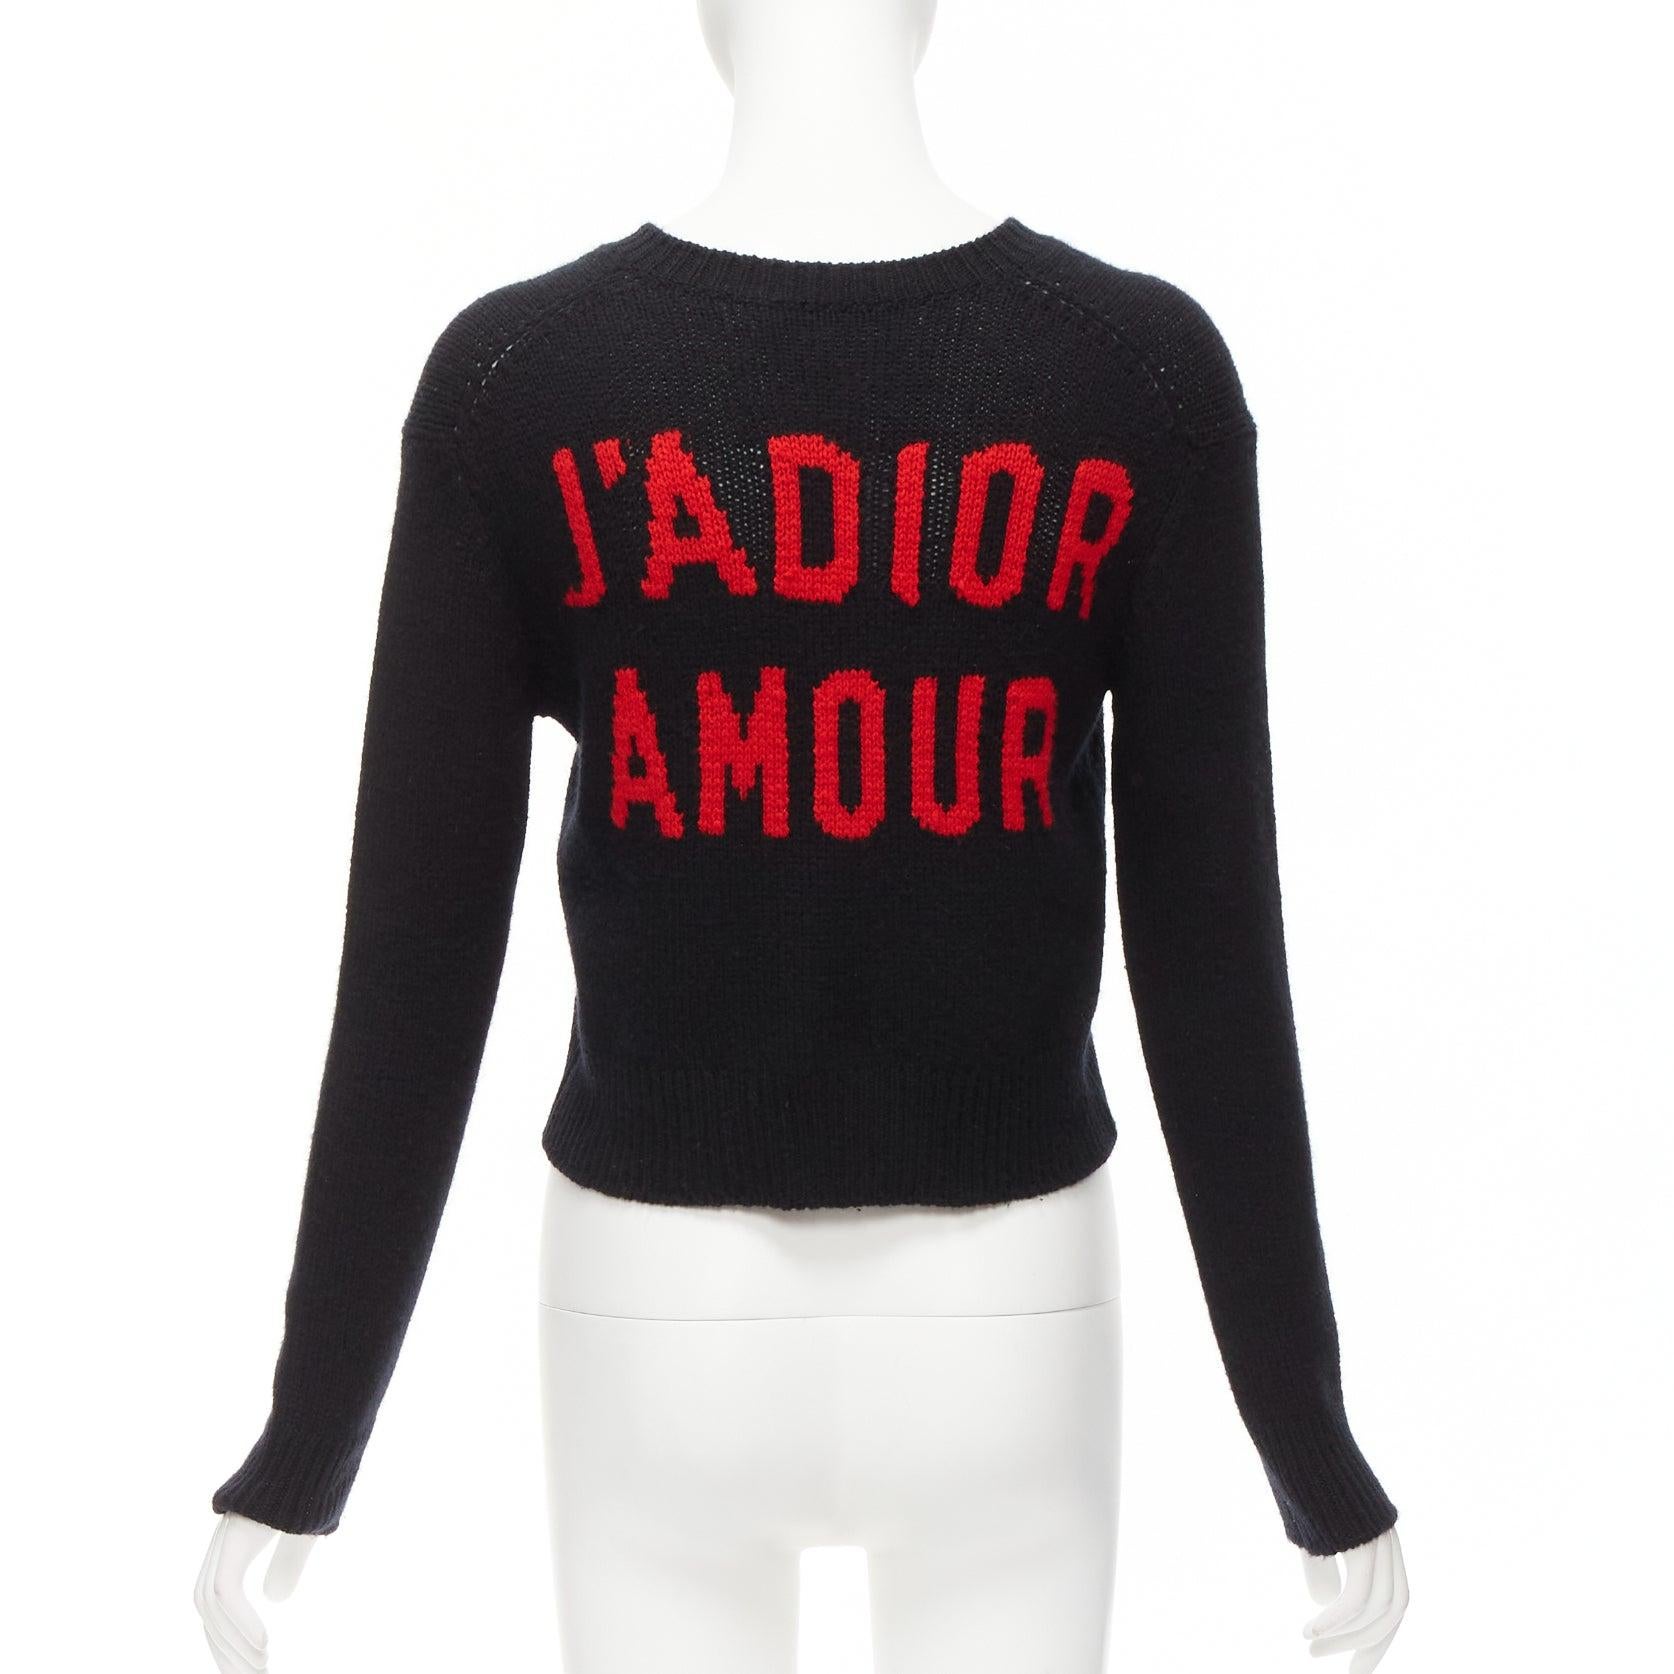 CHRISTIAN DIOR 100% cashmere J'adior Amor black red cropped sweater FR34 XS
Reference: YIKK/A00060
Brand: Dior
Designer: Maria Grazia Chiuri
Collection: Jadior Amor
Material: Cashmere
Color: Black, Red
Pattern: Solid
Closure: Pullover
Extra Details: